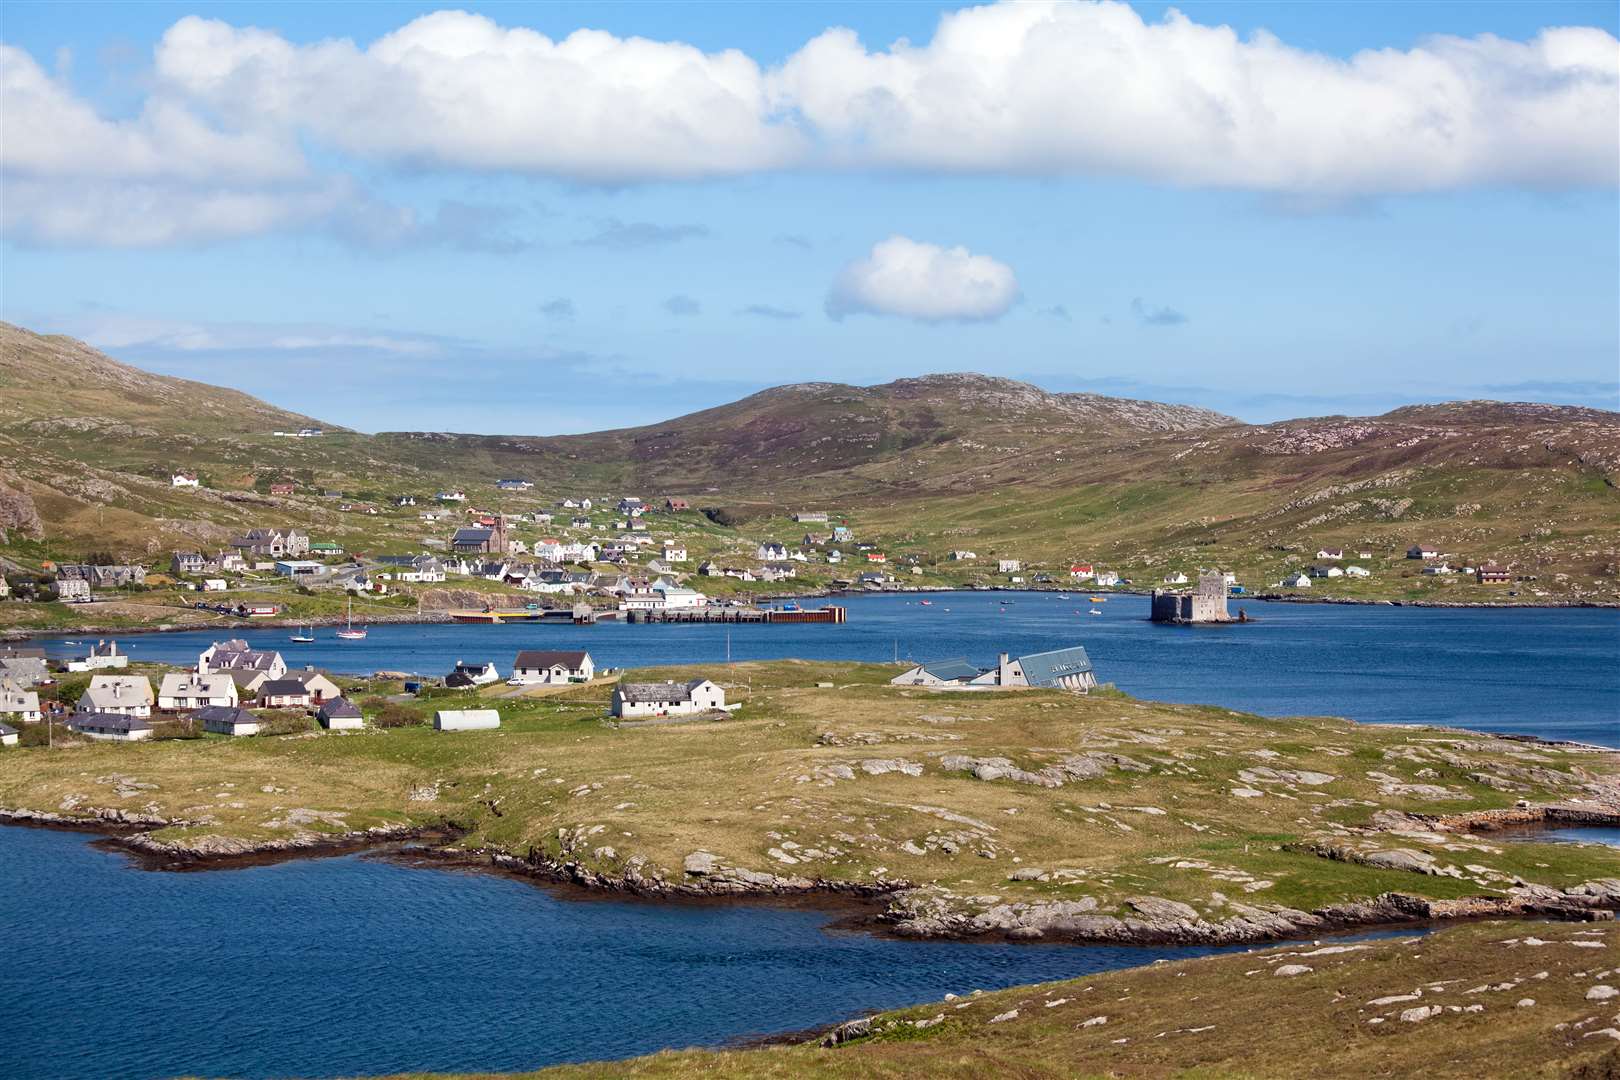 The community council on Barra is helping people isolated on the Hebridean island.